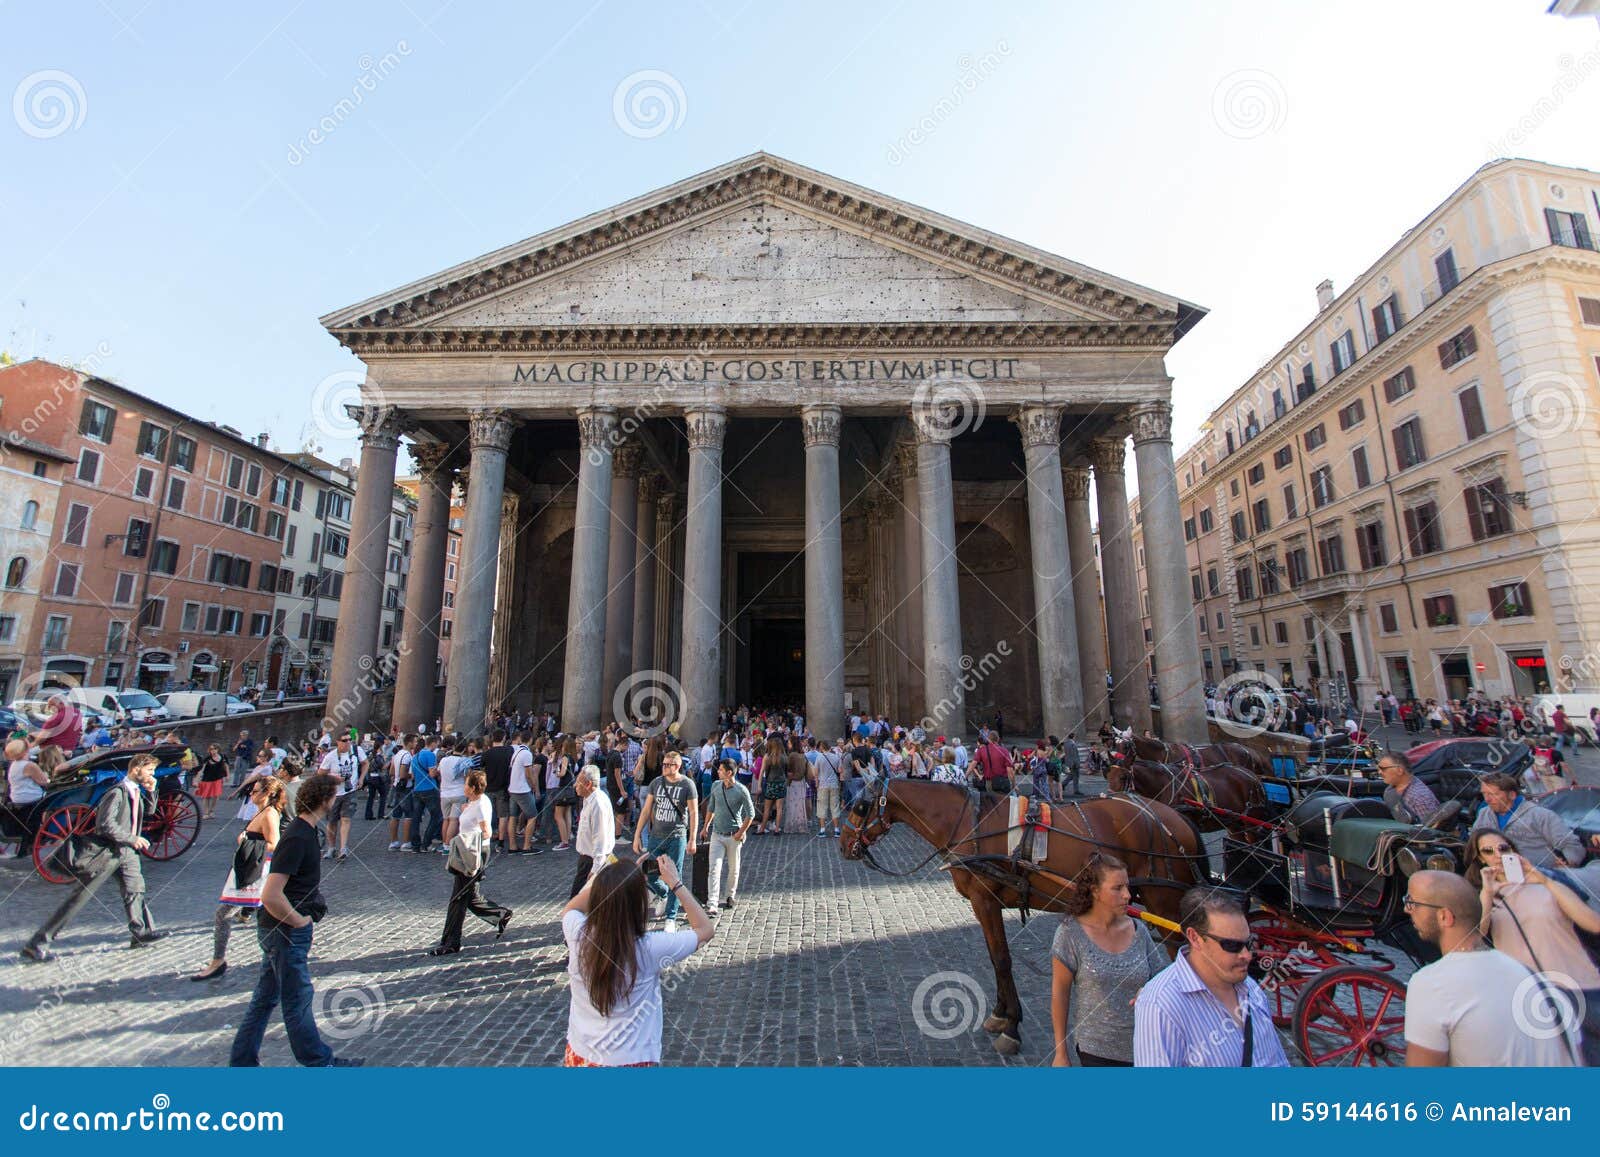 What was the purpose of the Roman Pantheon?